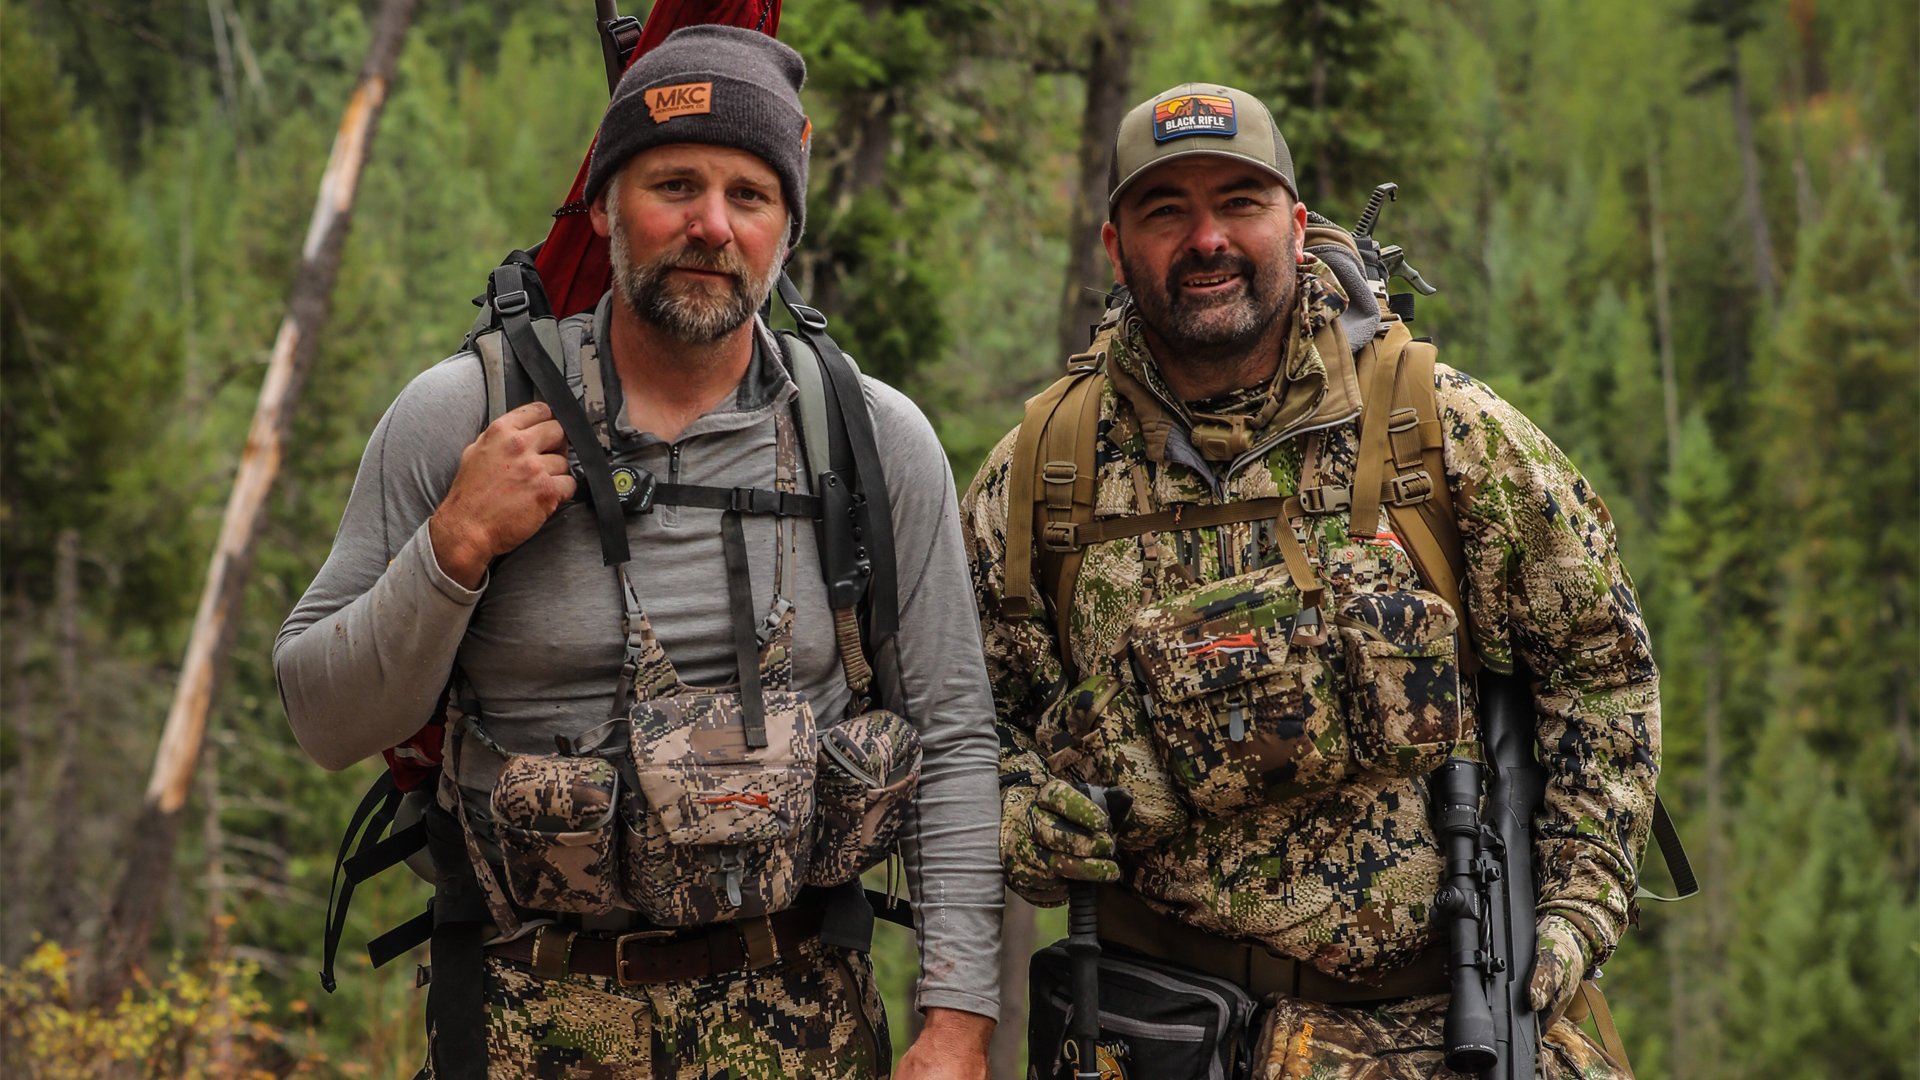 Josh Smith of Montana Knife Co., left, and the author prepare to leave elk camp for the day. Photo by Lacey Whitehouse.